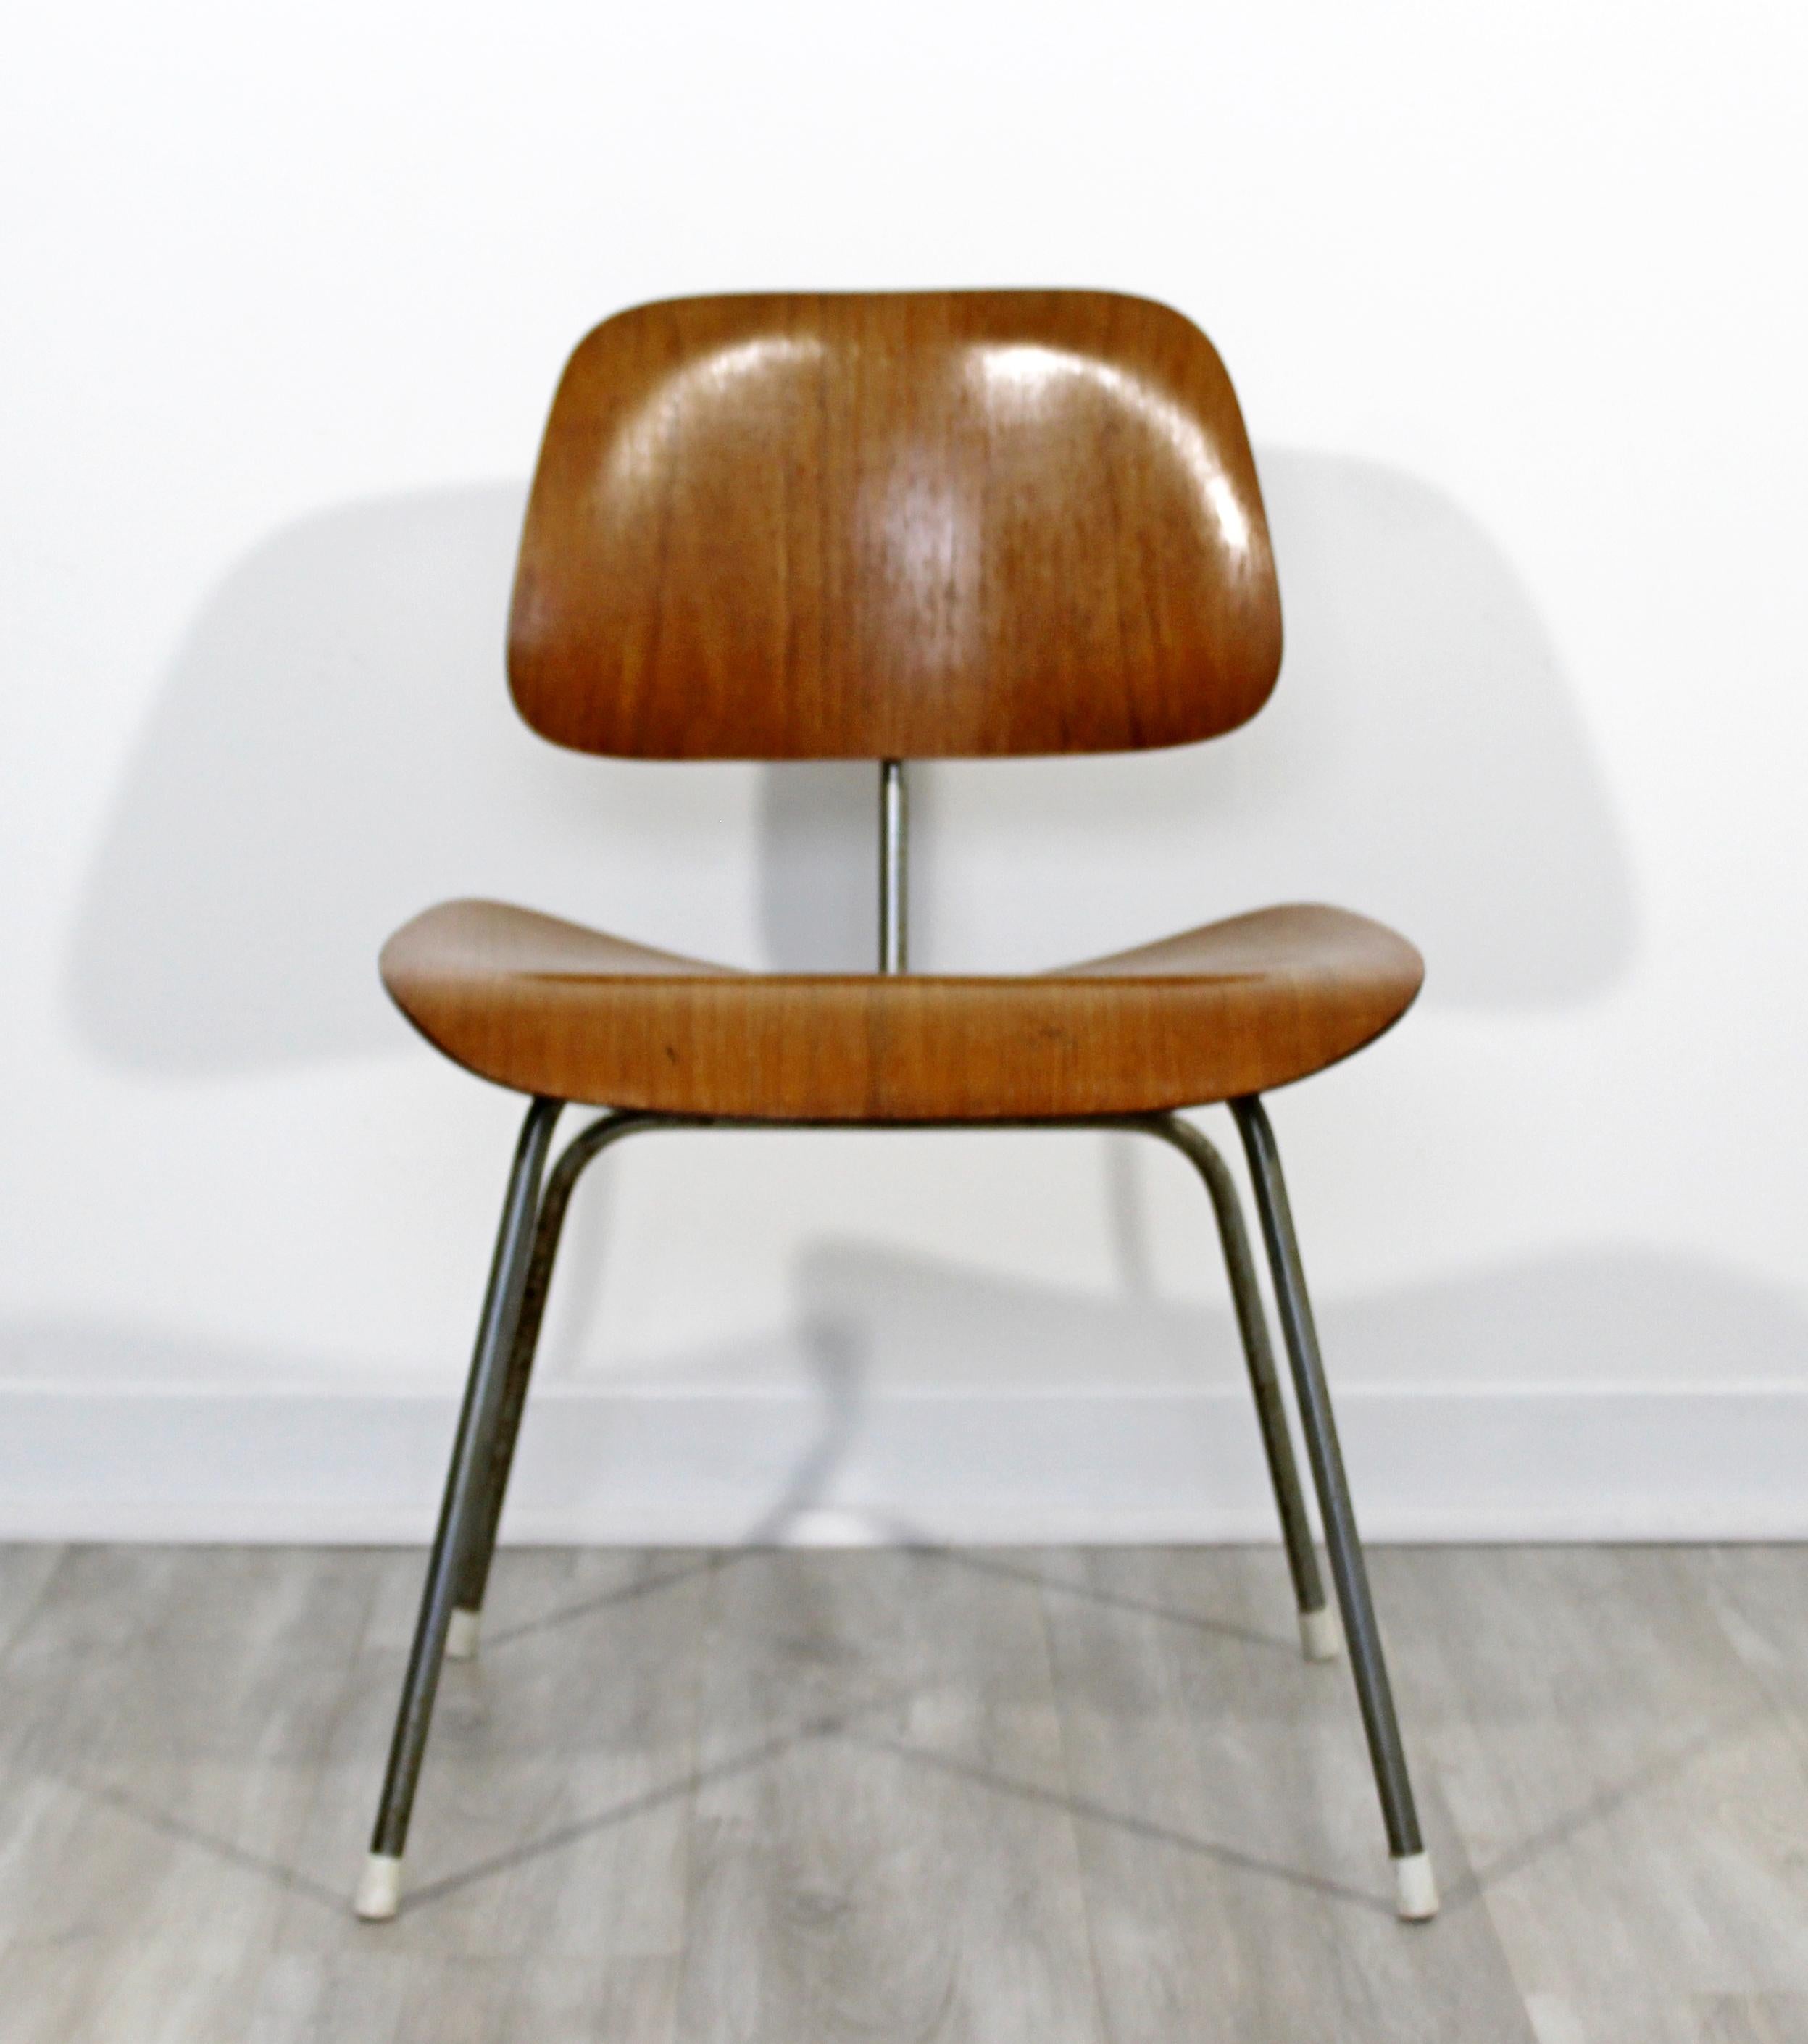 For your consideration is an original, early DCM side chair, by Charles Eames for Herman Miller, circa 1950s. In excellent vintage condition. The dimensions are 19.25